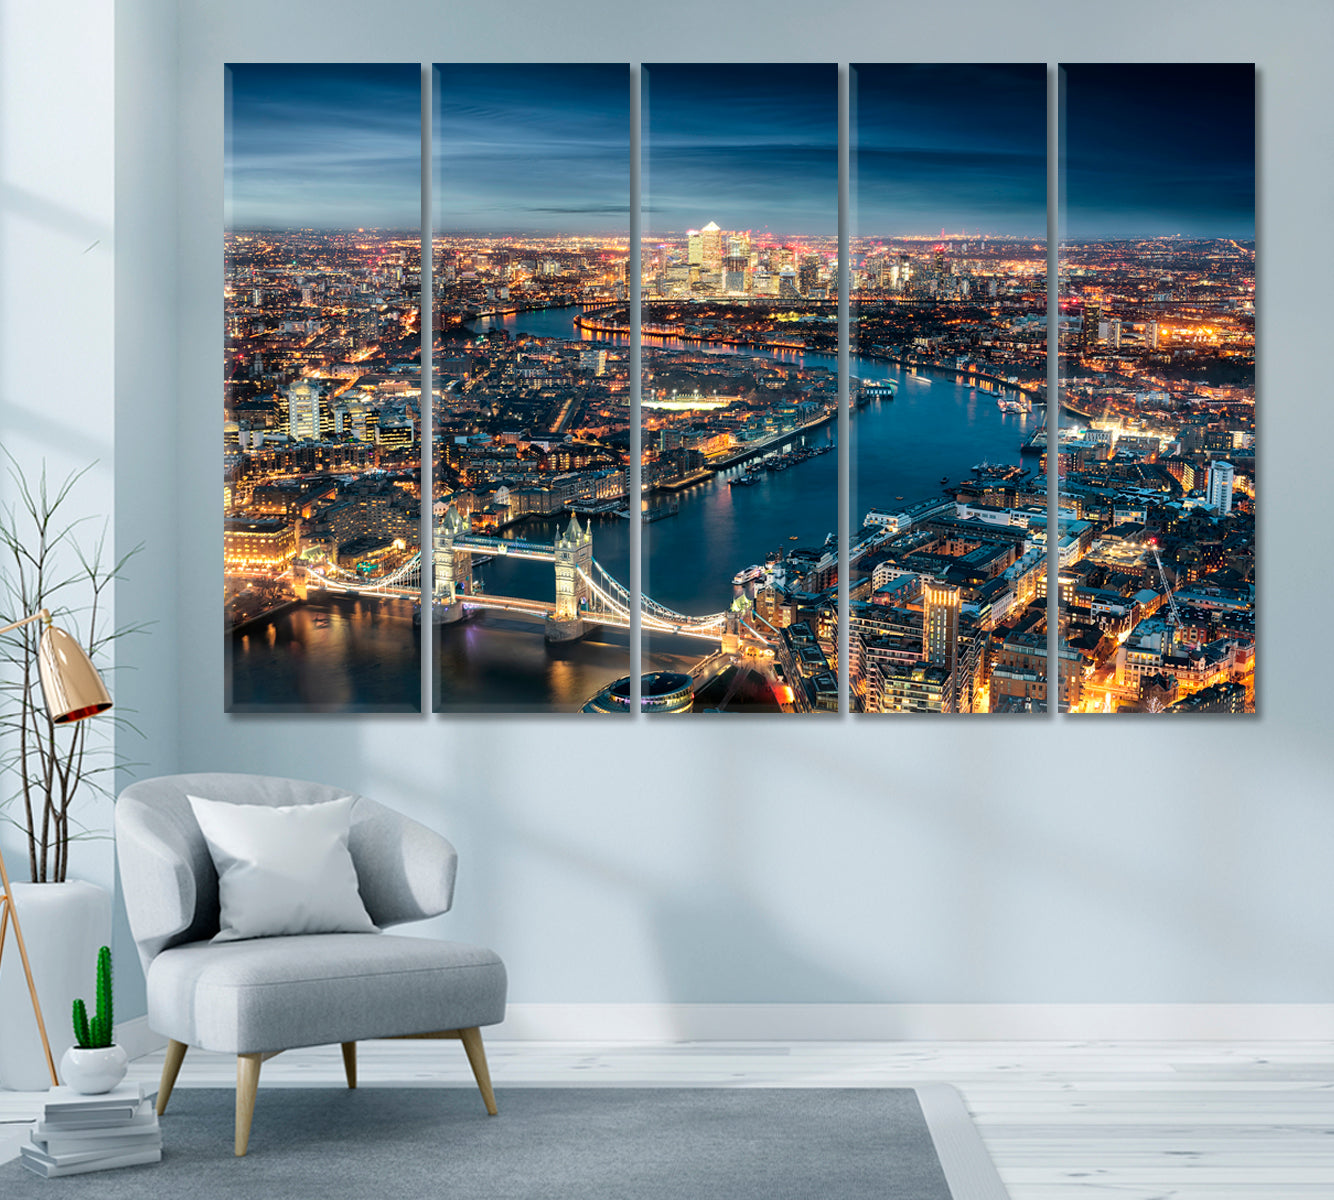 Canary Wharf Financial District and Tower Bridge London Canvas Print ArtLexy 5 Panels 36"x24" inches 